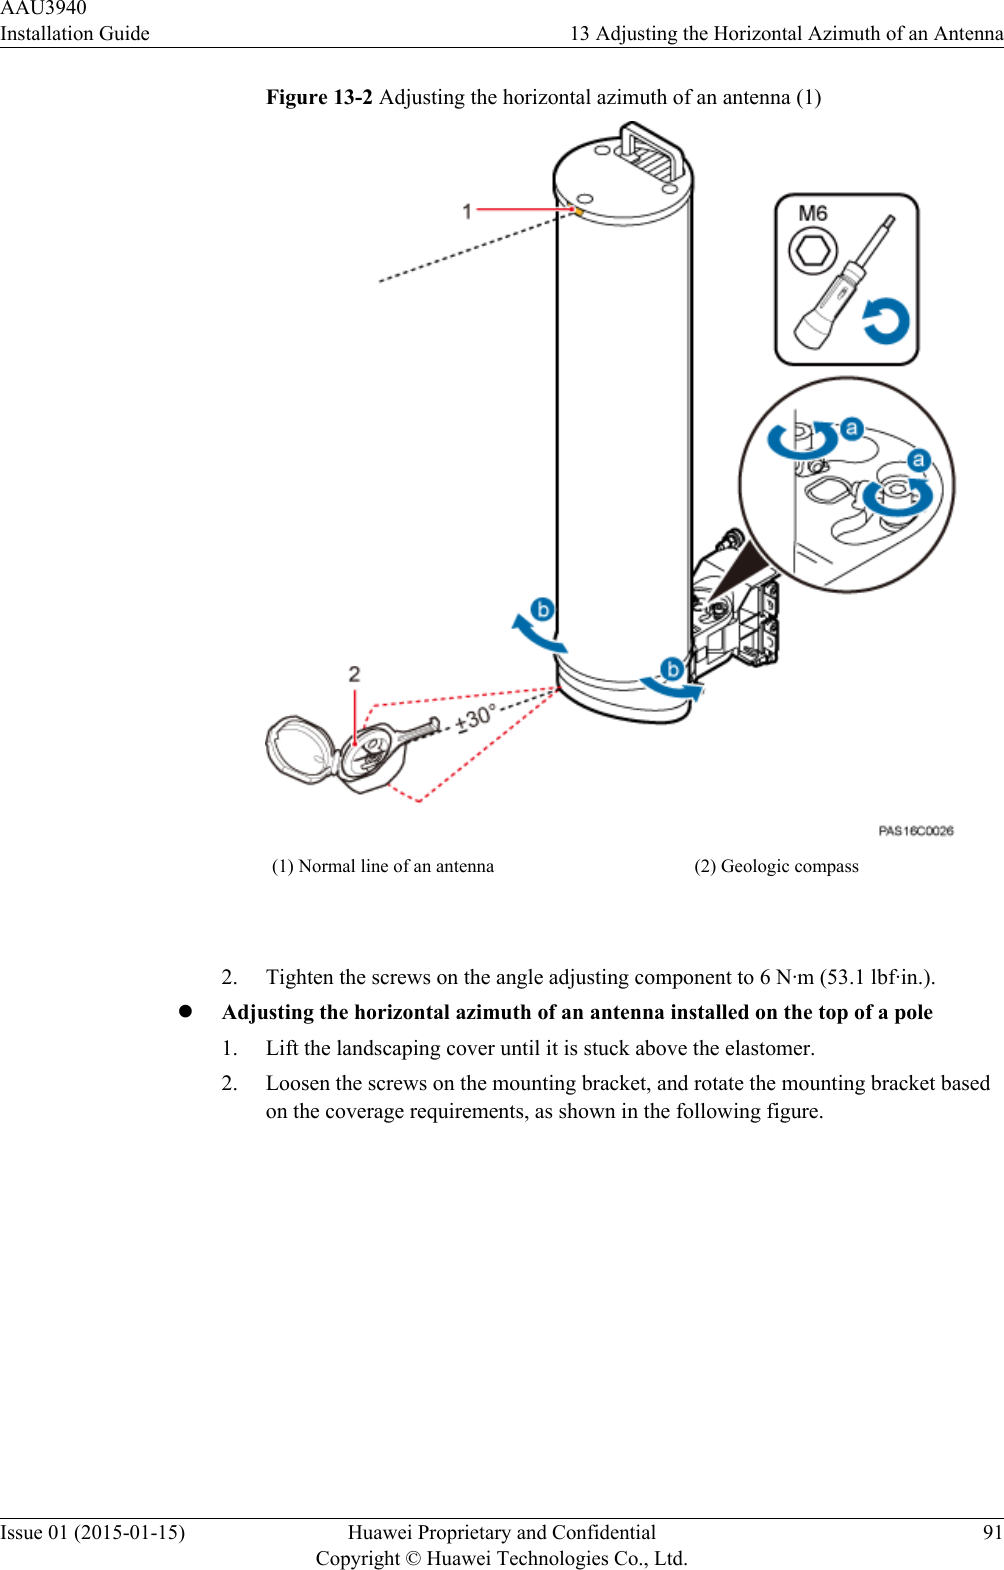 Figure 13-2 Adjusting the horizontal azimuth of an antenna (1)(1) Normal line of an antenna (2) Geologic compass 2. Tighten the screws on the angle adjusting component to 6 N·m (53.1 lbf·in.).lAdjusting the horizontal azimuth of an antenna installed on the top of a pole1. Lift the landscaping cover until it is stuck above the elastomer.2. Loosen the screws on the mounting bracket, and rotate the mounting bracket basedon the coverage requirements, as shown in the following figure.AAU3940Installation Guide 13 Adjusting the Horizontal Azimuth of an AntennaIssue 01 (2015-01-15) Huawei Proprietary and ConfidentialCopyright © Huawei Technologies Co., Ltd.91